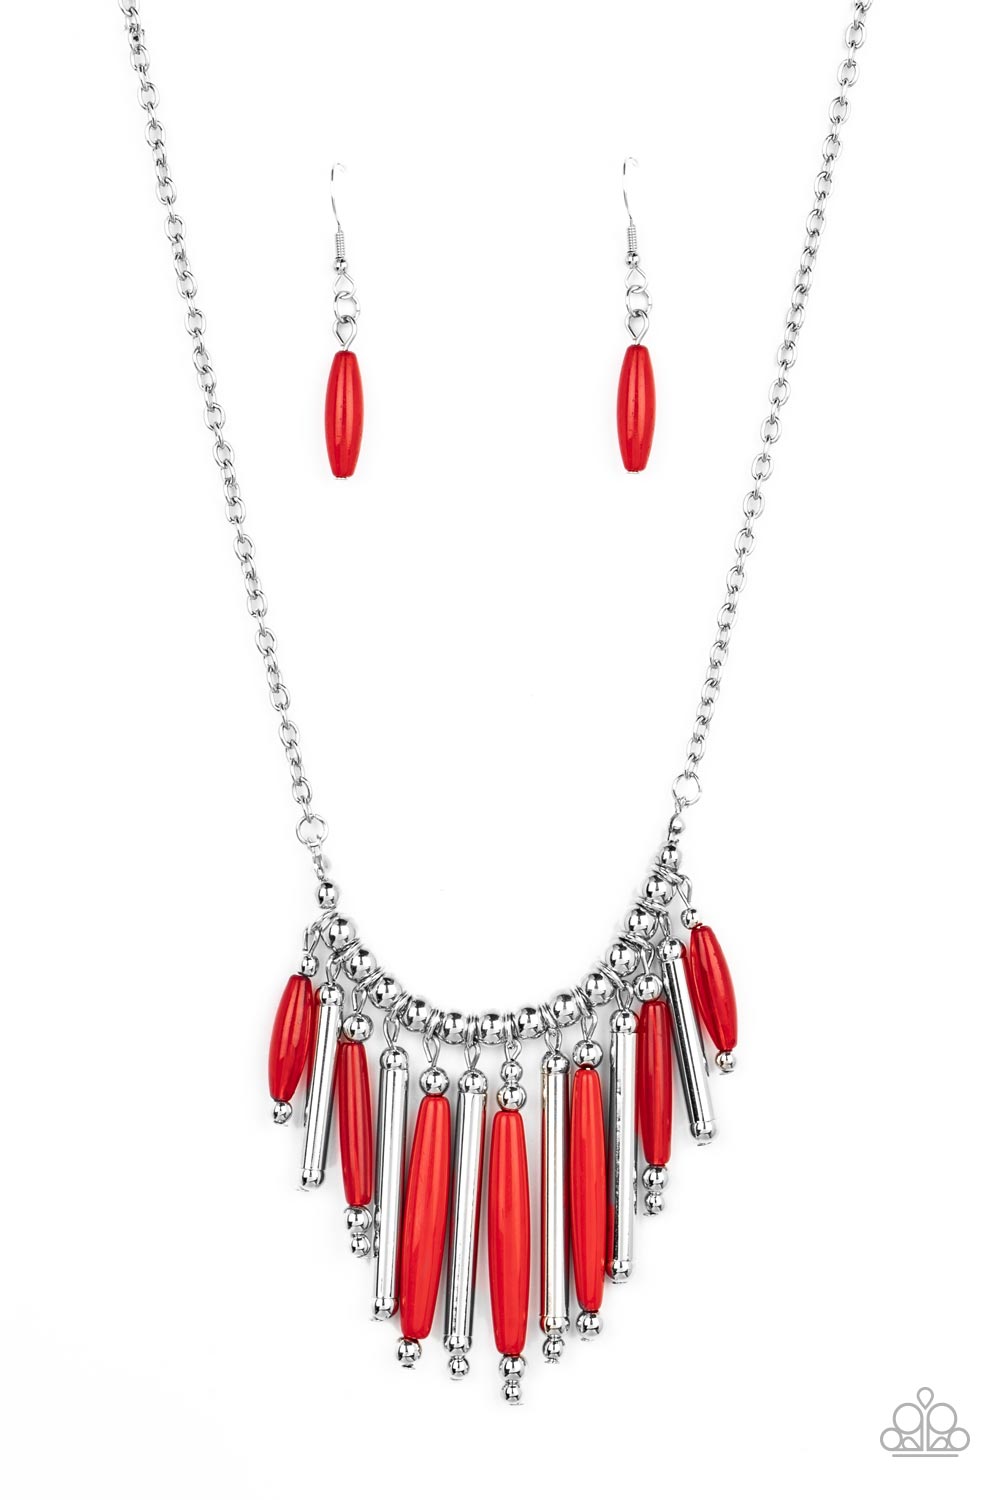 Paparazzi Accessories - Bohemian Breeze - Red Necklace flanked by dainty silver beads, cylindrical silver and glassy and opaque red beads alternate along a silver beaded chain, fanning out into a colorful fringe below the collar. Features an adjustable clasp closure.  Sold as one individual necklace. Includes one pair of matching earrings.